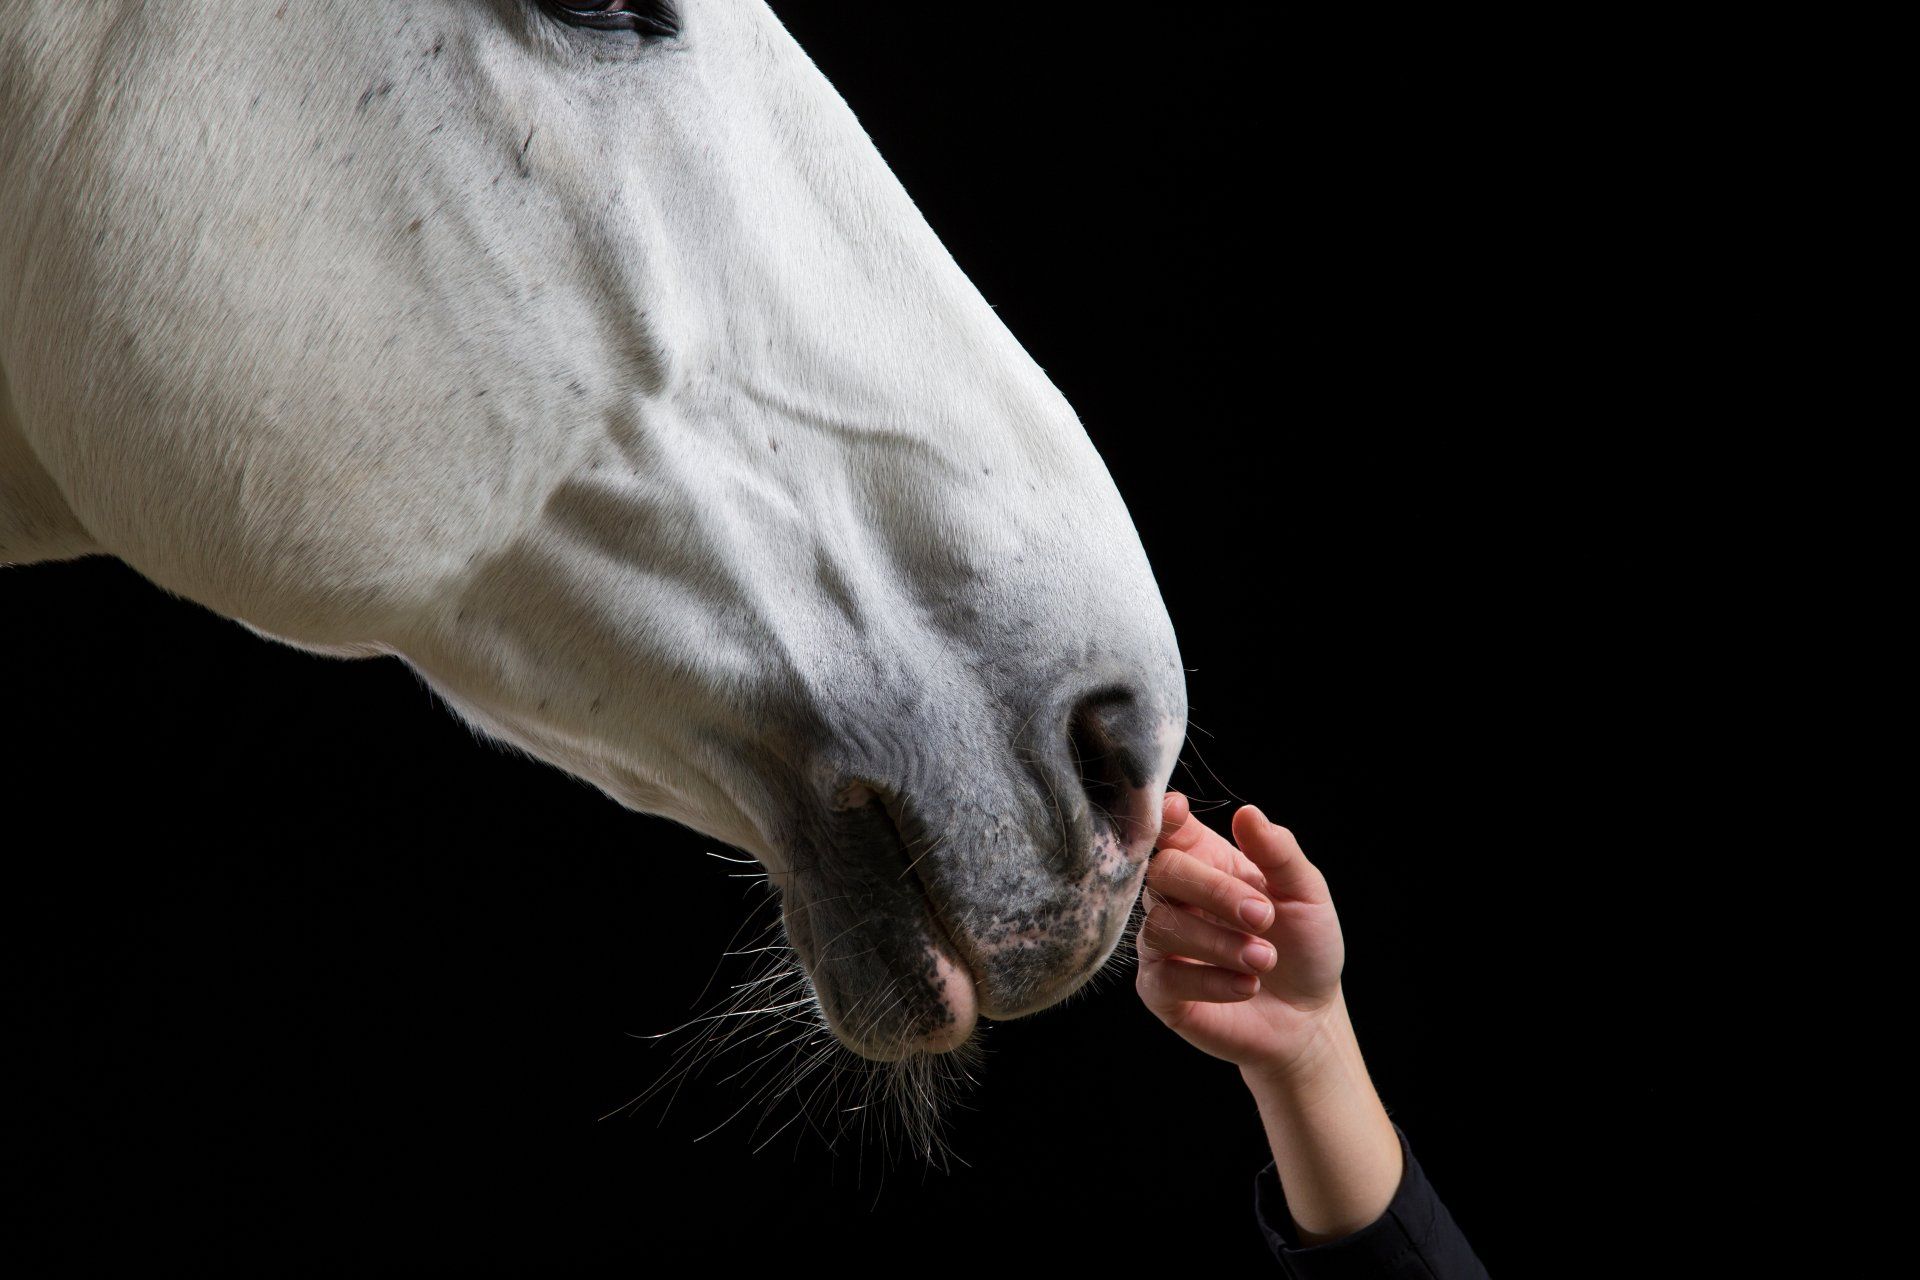 Positive horse tuition, with science based learning